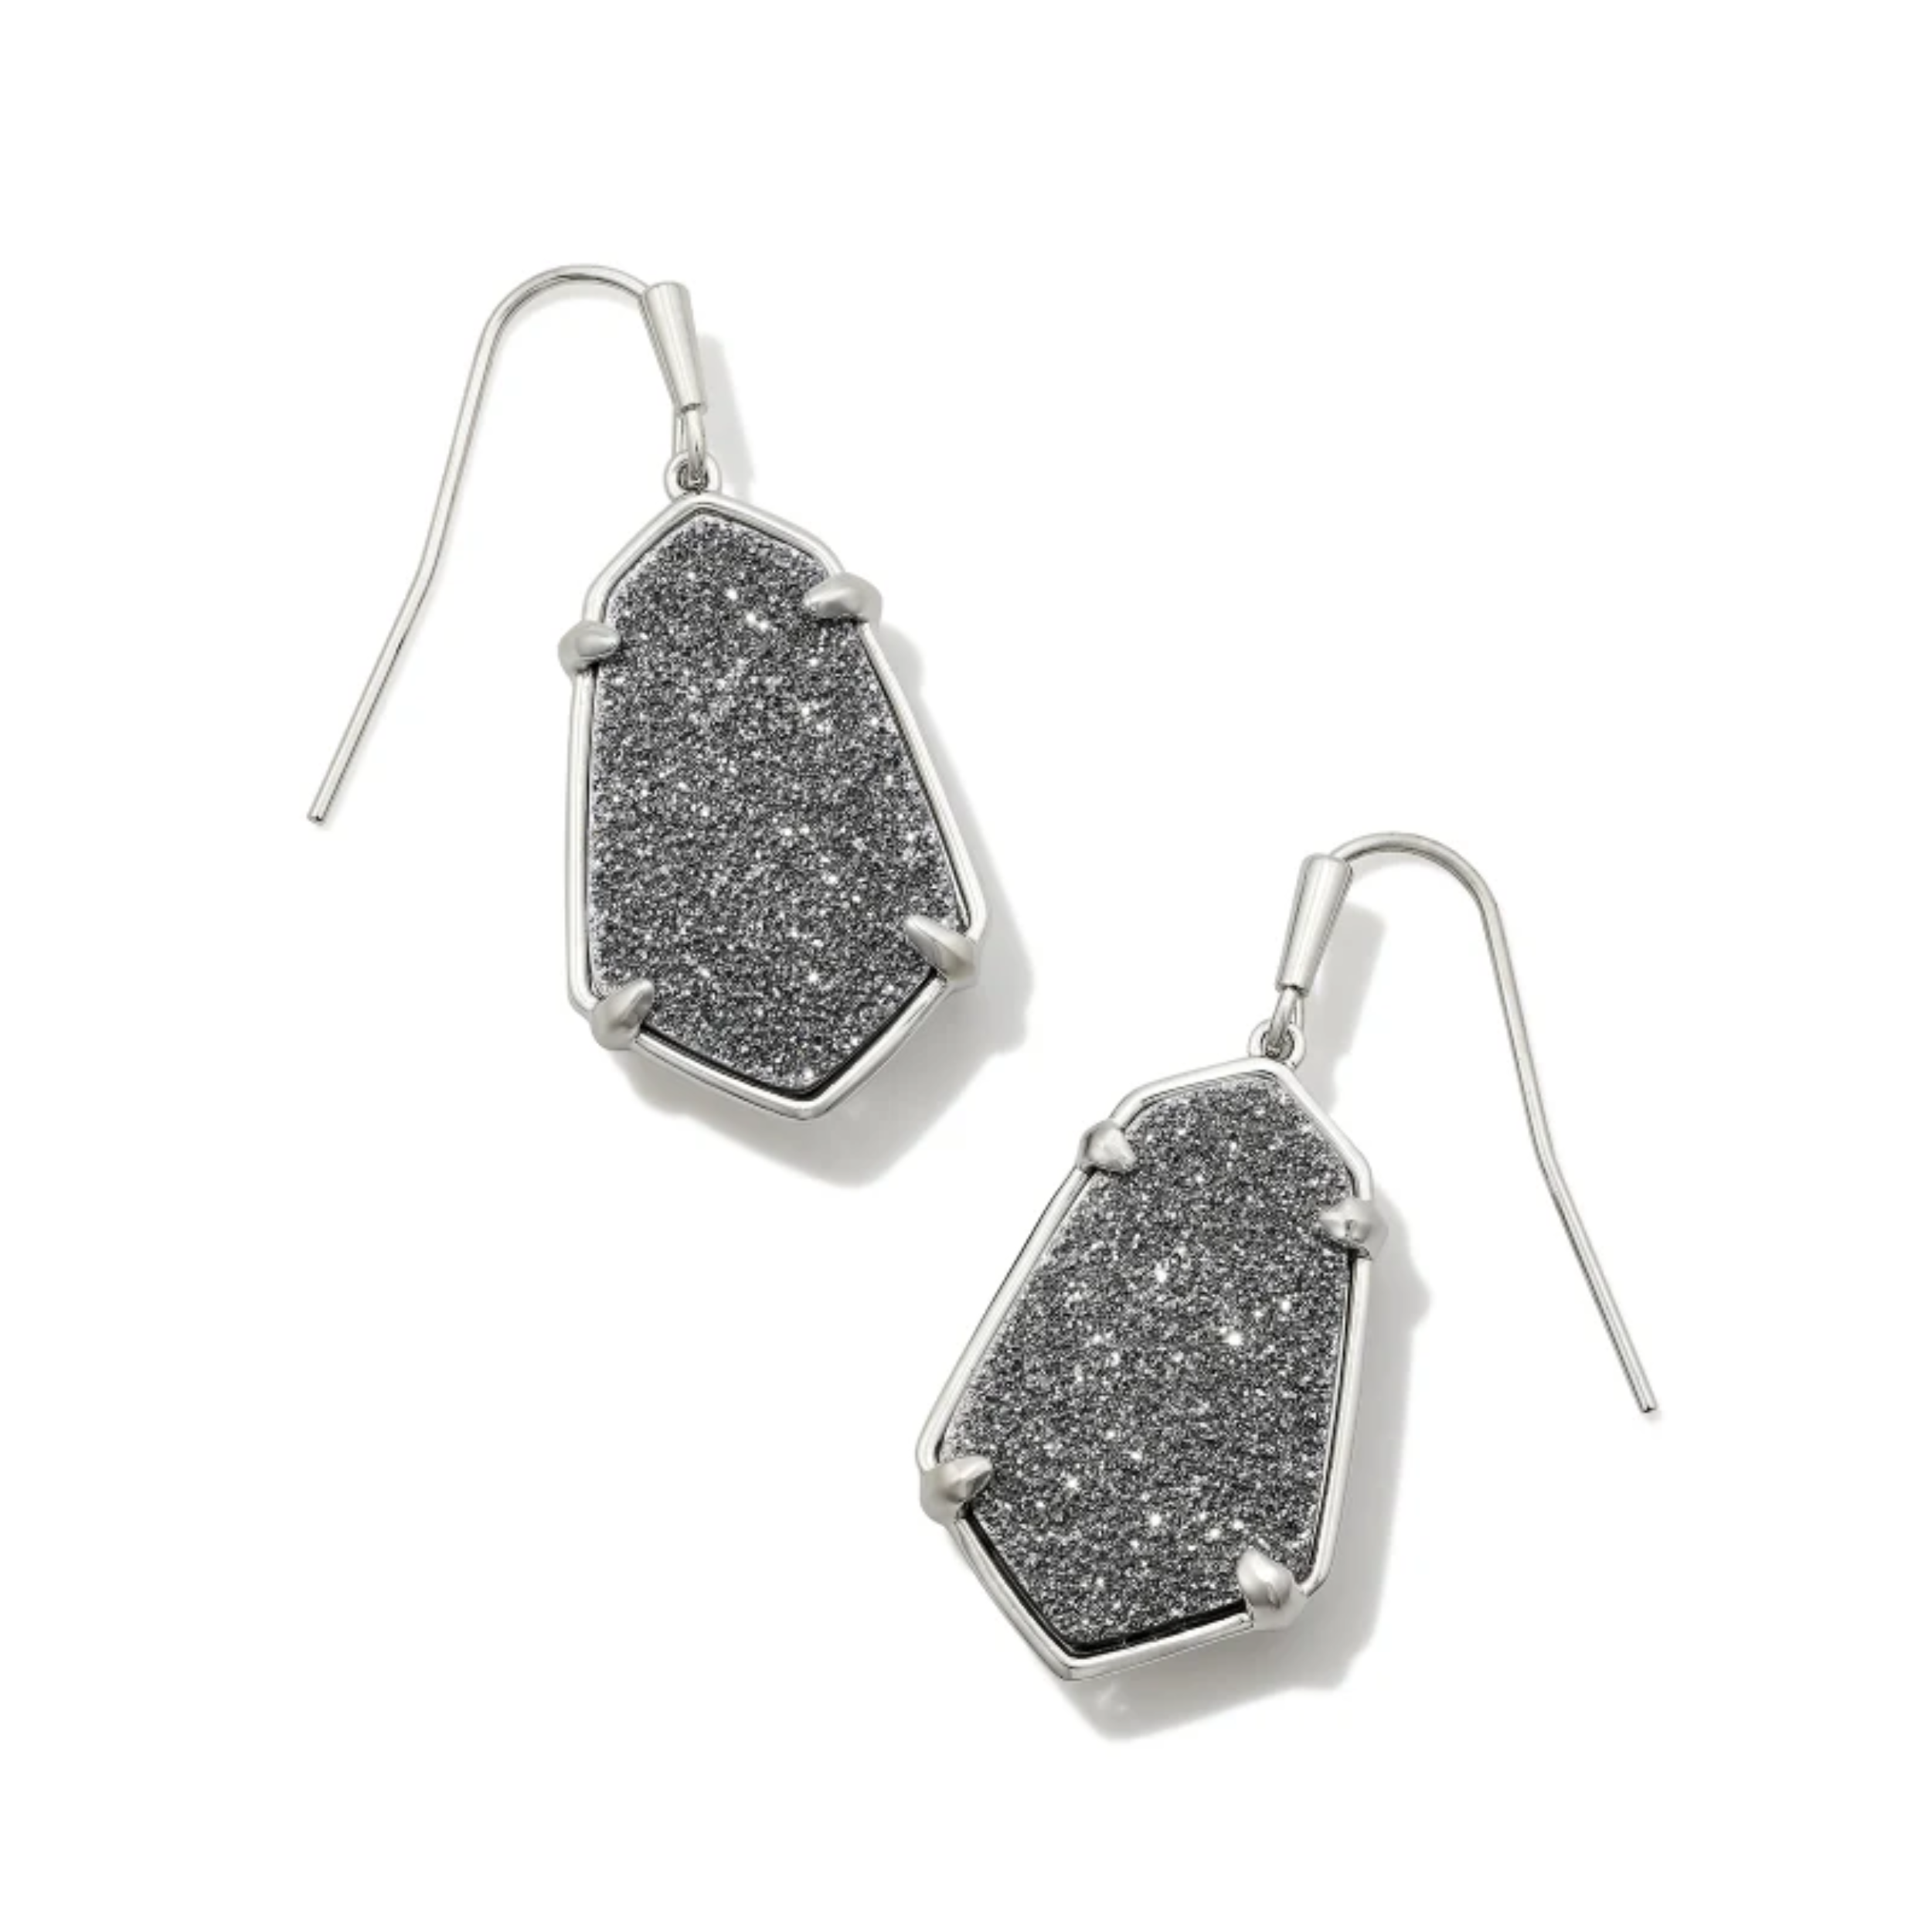 These Alexandria Drop Earrings In Silver Platinum Drusy by Kendra Scott are pictured on a white background.